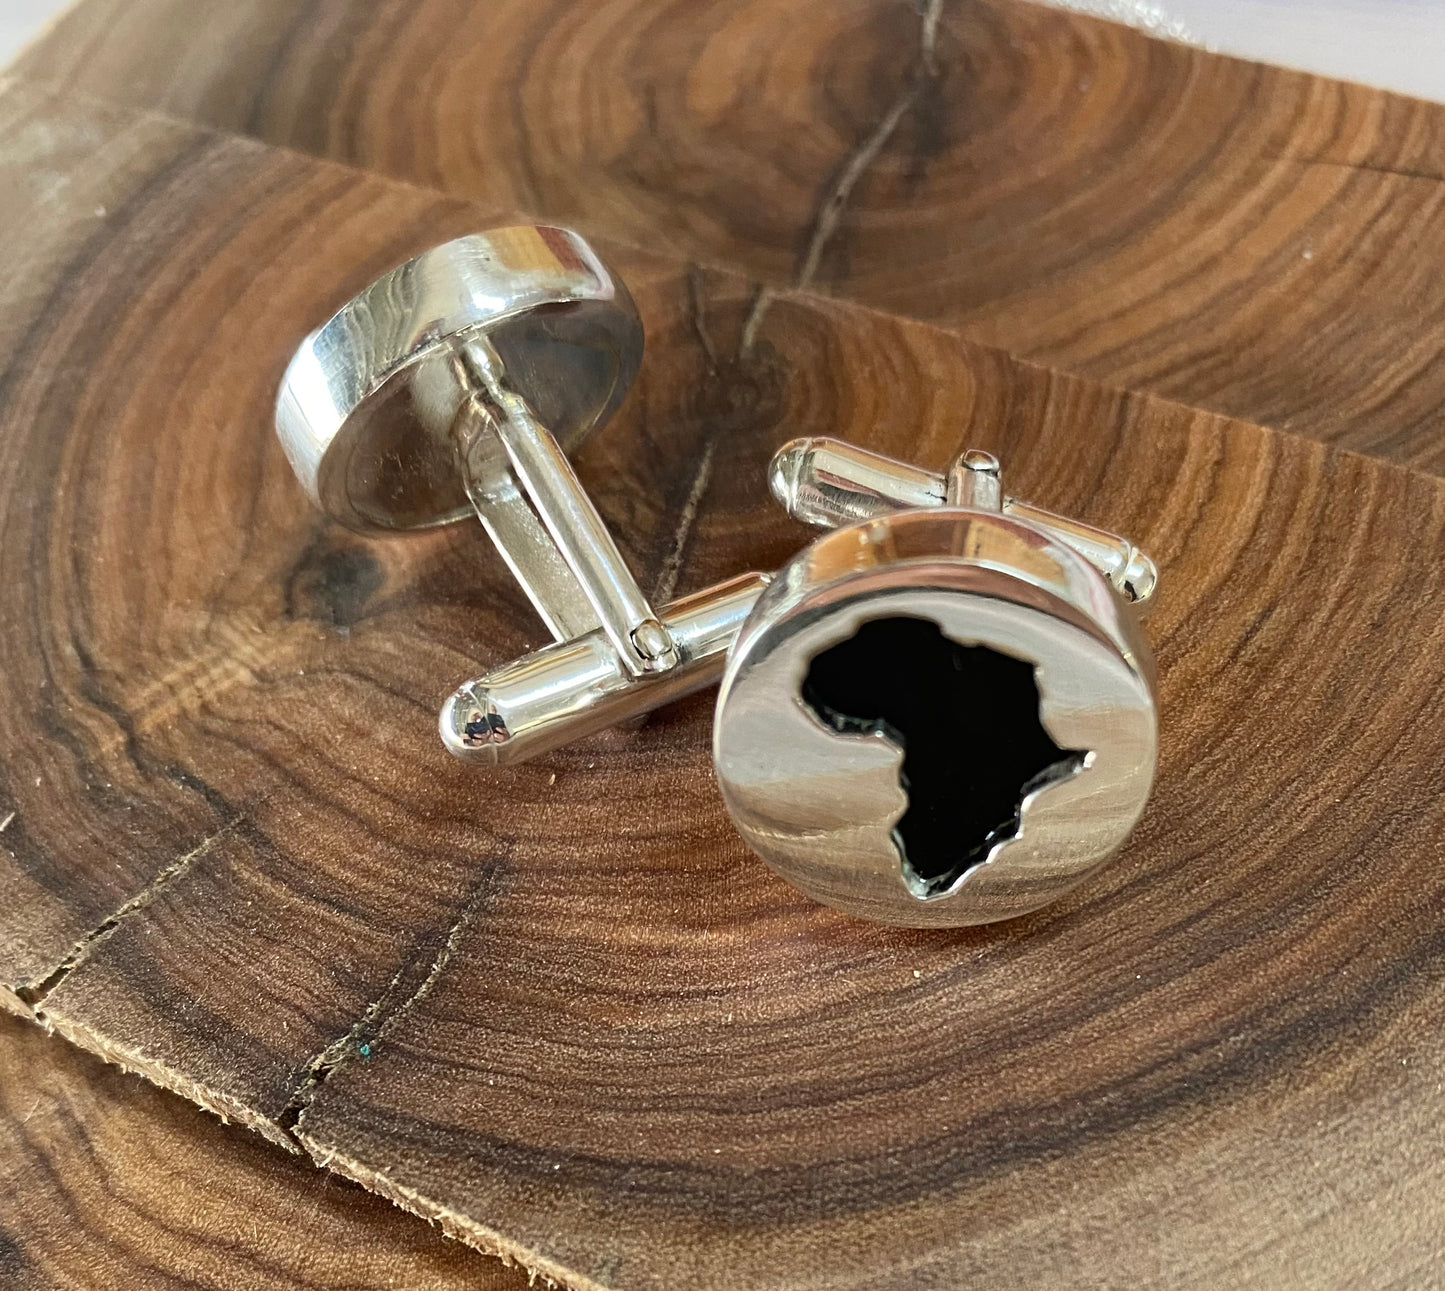 Elegant silver Africa-shaped cufflinks displayed on wooden surface for a rustic look.